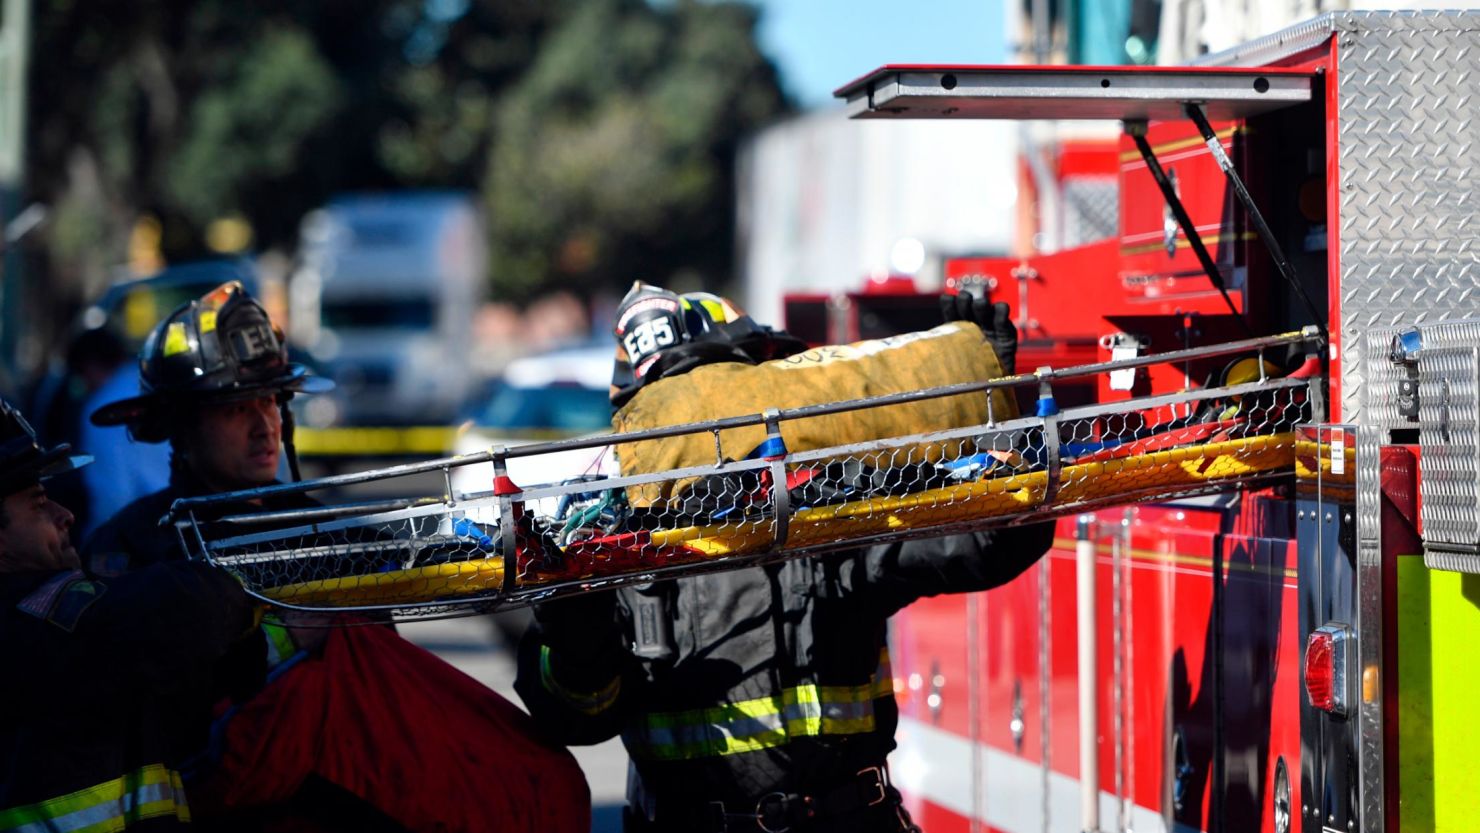 A stretcher is taken out of a fire truck at the scene of a fire that destroyed a warehouse on December. 3, 2016, in Oakland, Calif. A deadly fire broke out during a rave at the converted warehouse in the San Francisco Bay Area.